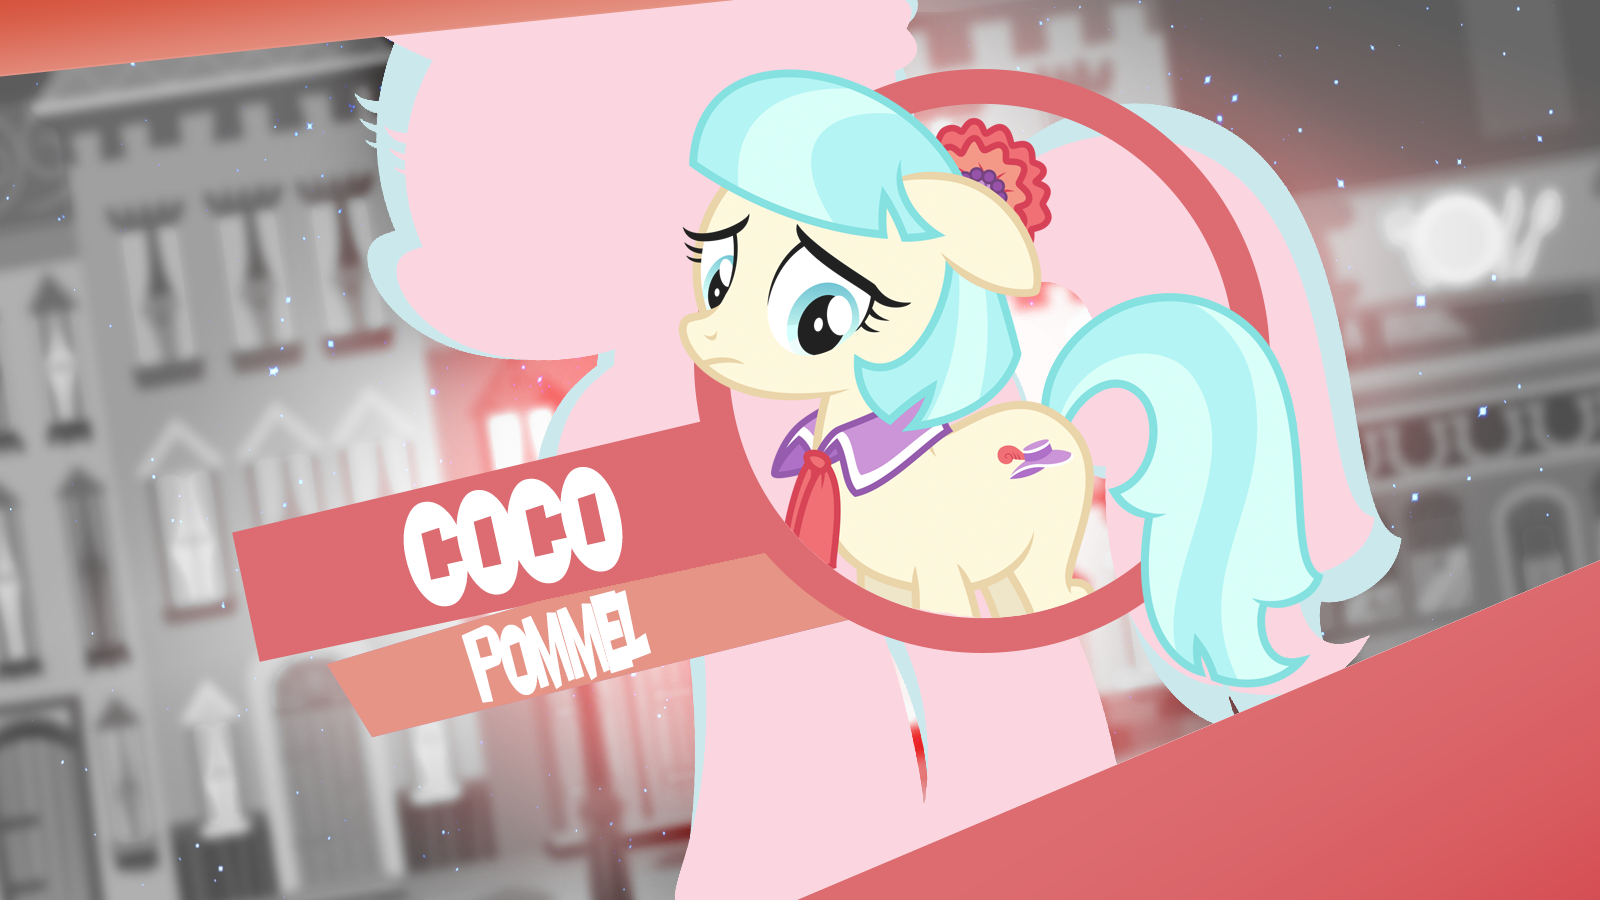 Wallpaper /Coco Pommel/ by KrewellaHanoi, thatguy1945 and Whimsy-Floof